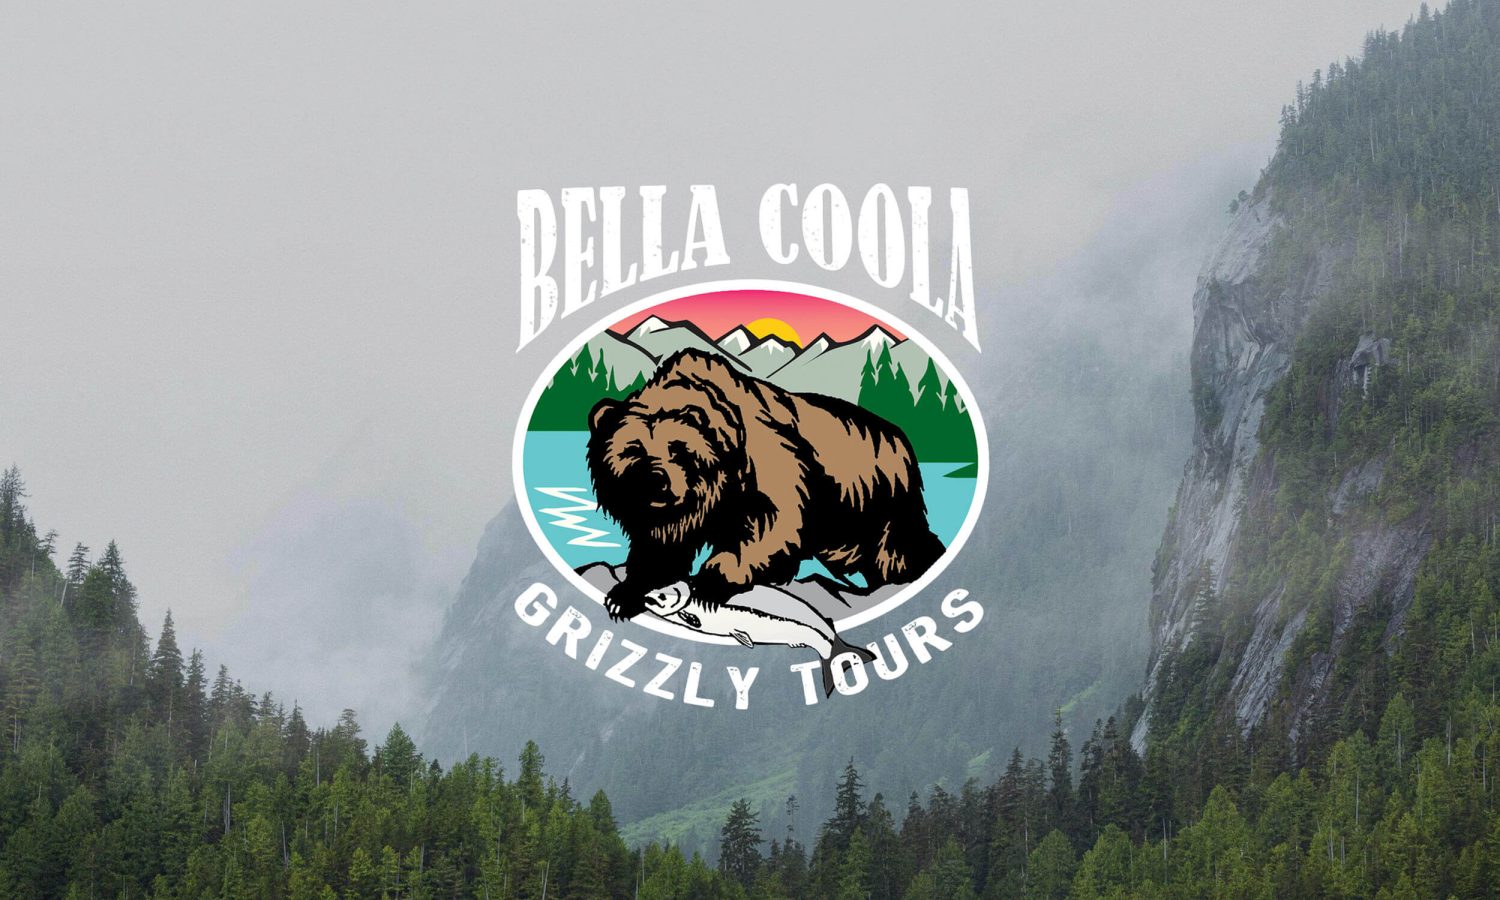 grizzly tours